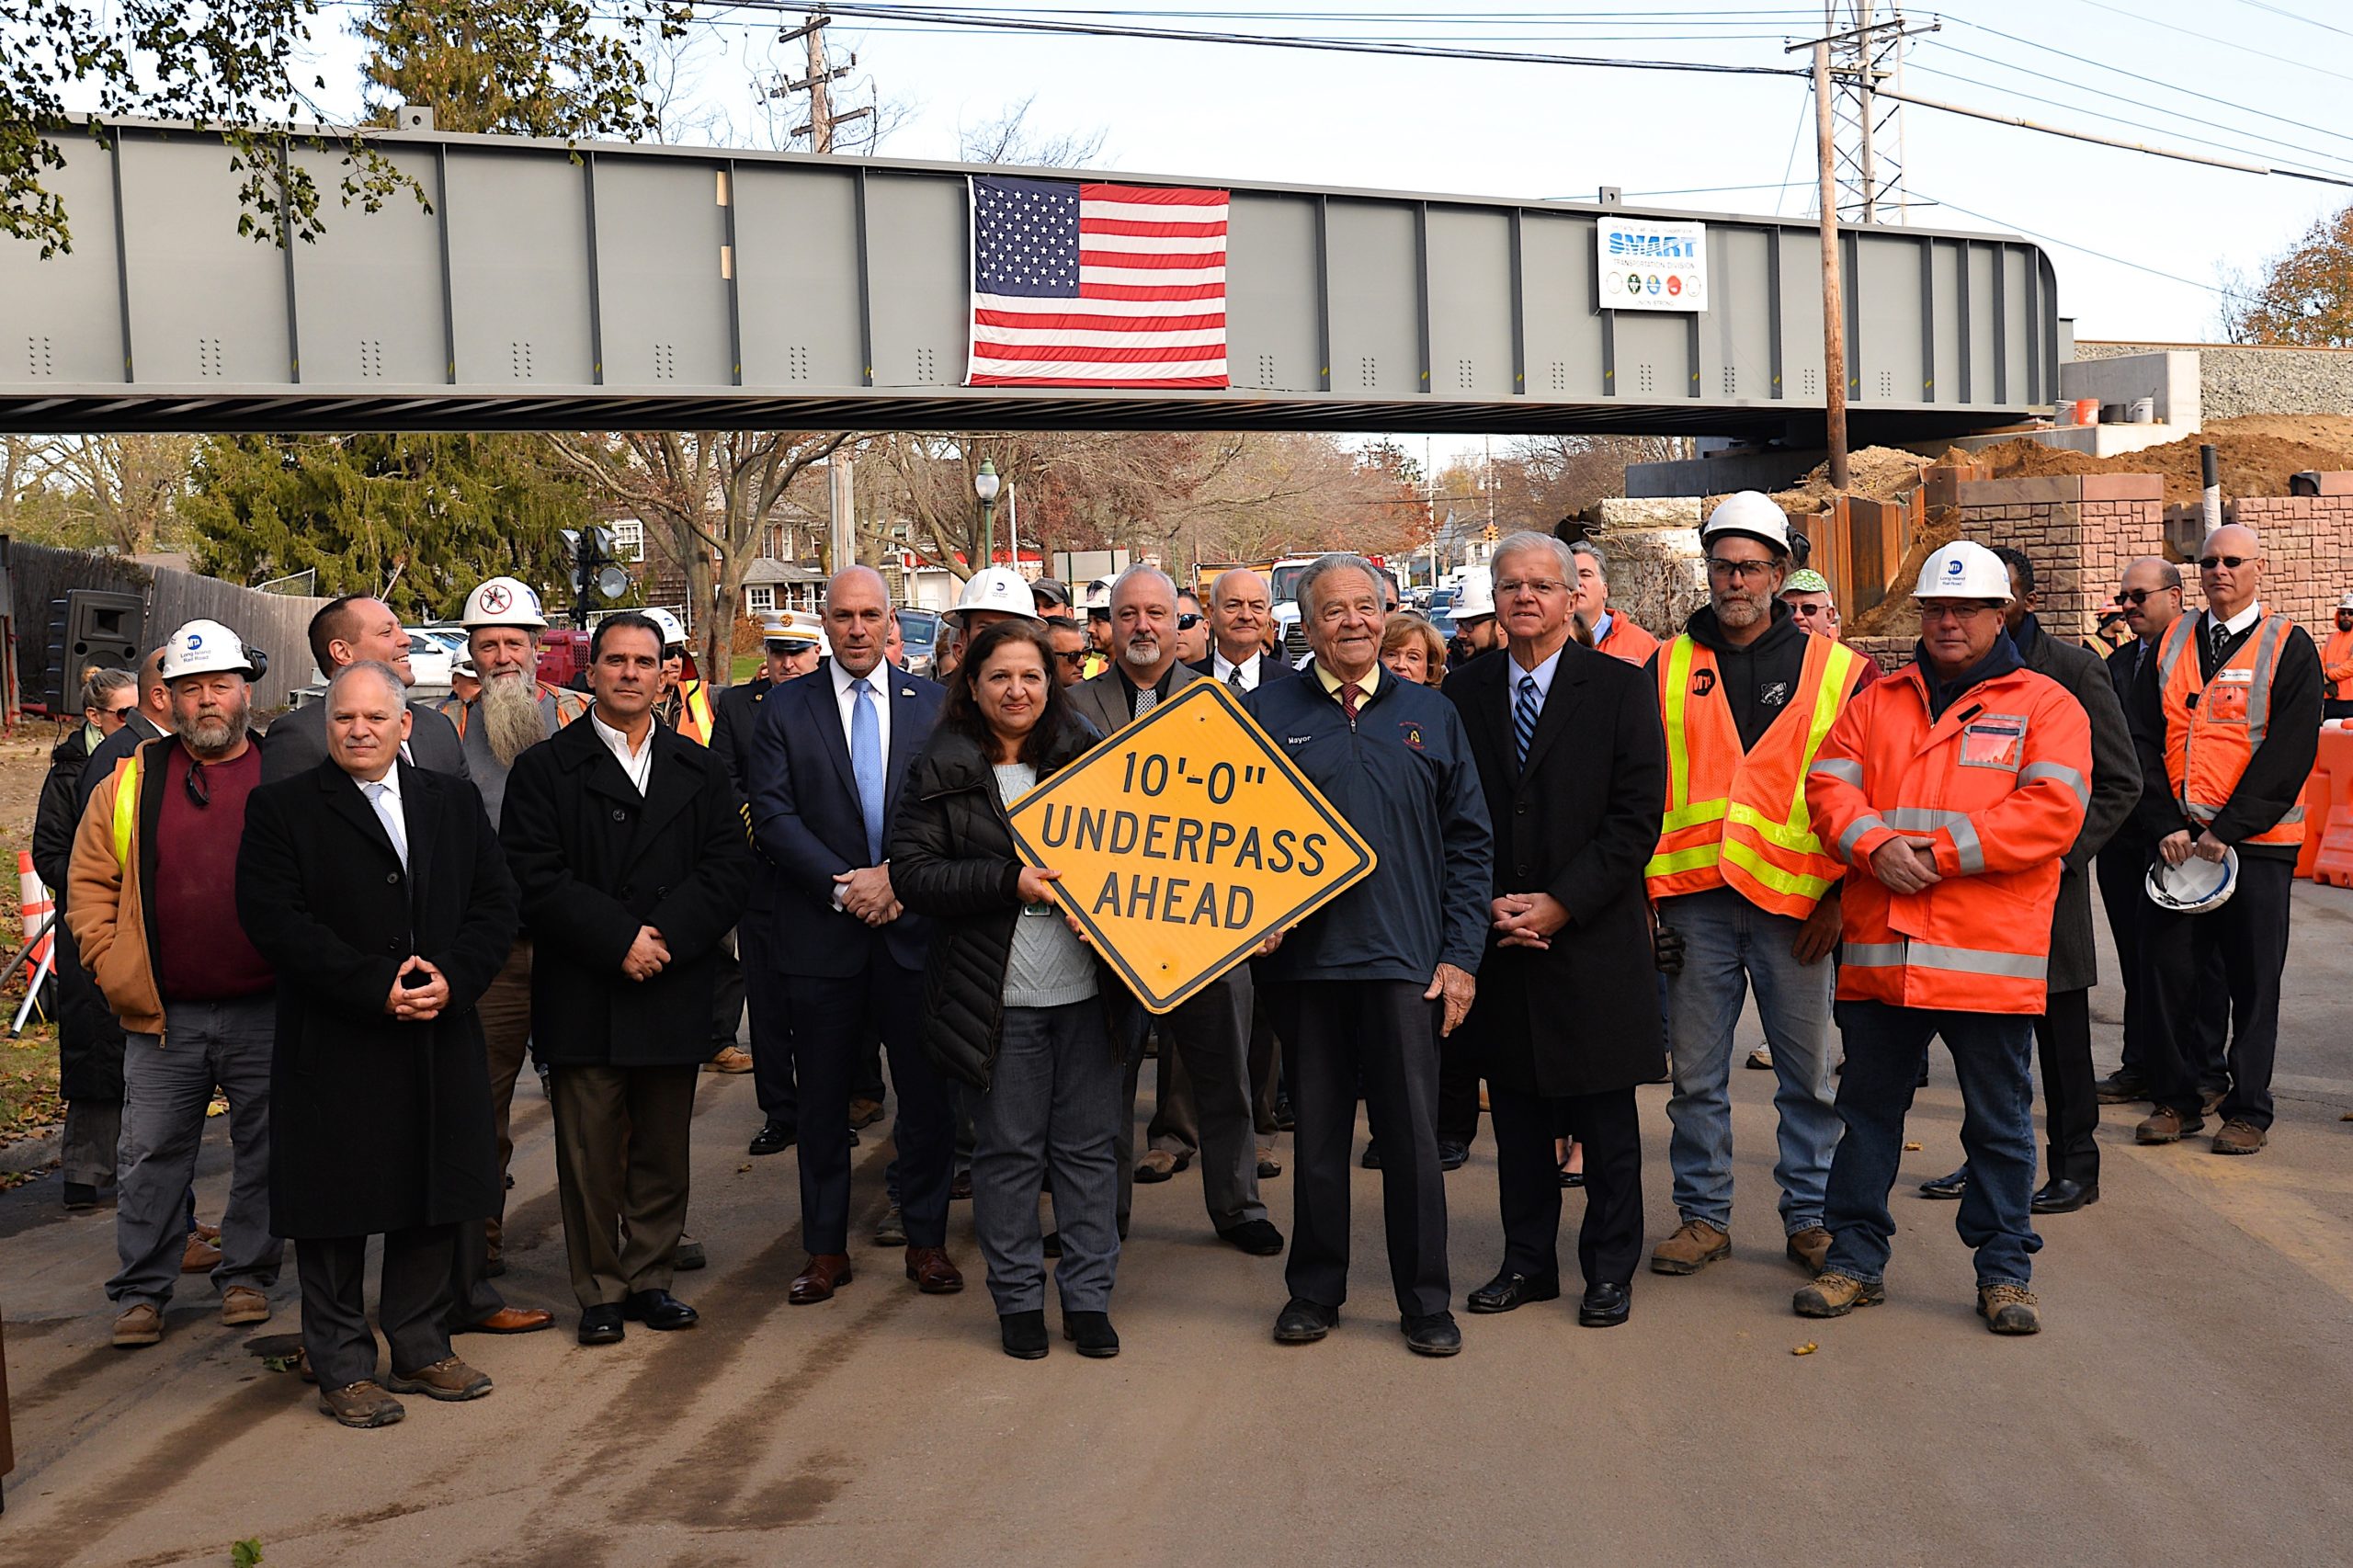 Officials from the LIRR and Esat Hampton Village celebrated in November when the new, higher, trestles were completed. But the influx of large trucks using the roadways between the two new trestles has caused other concerns. 